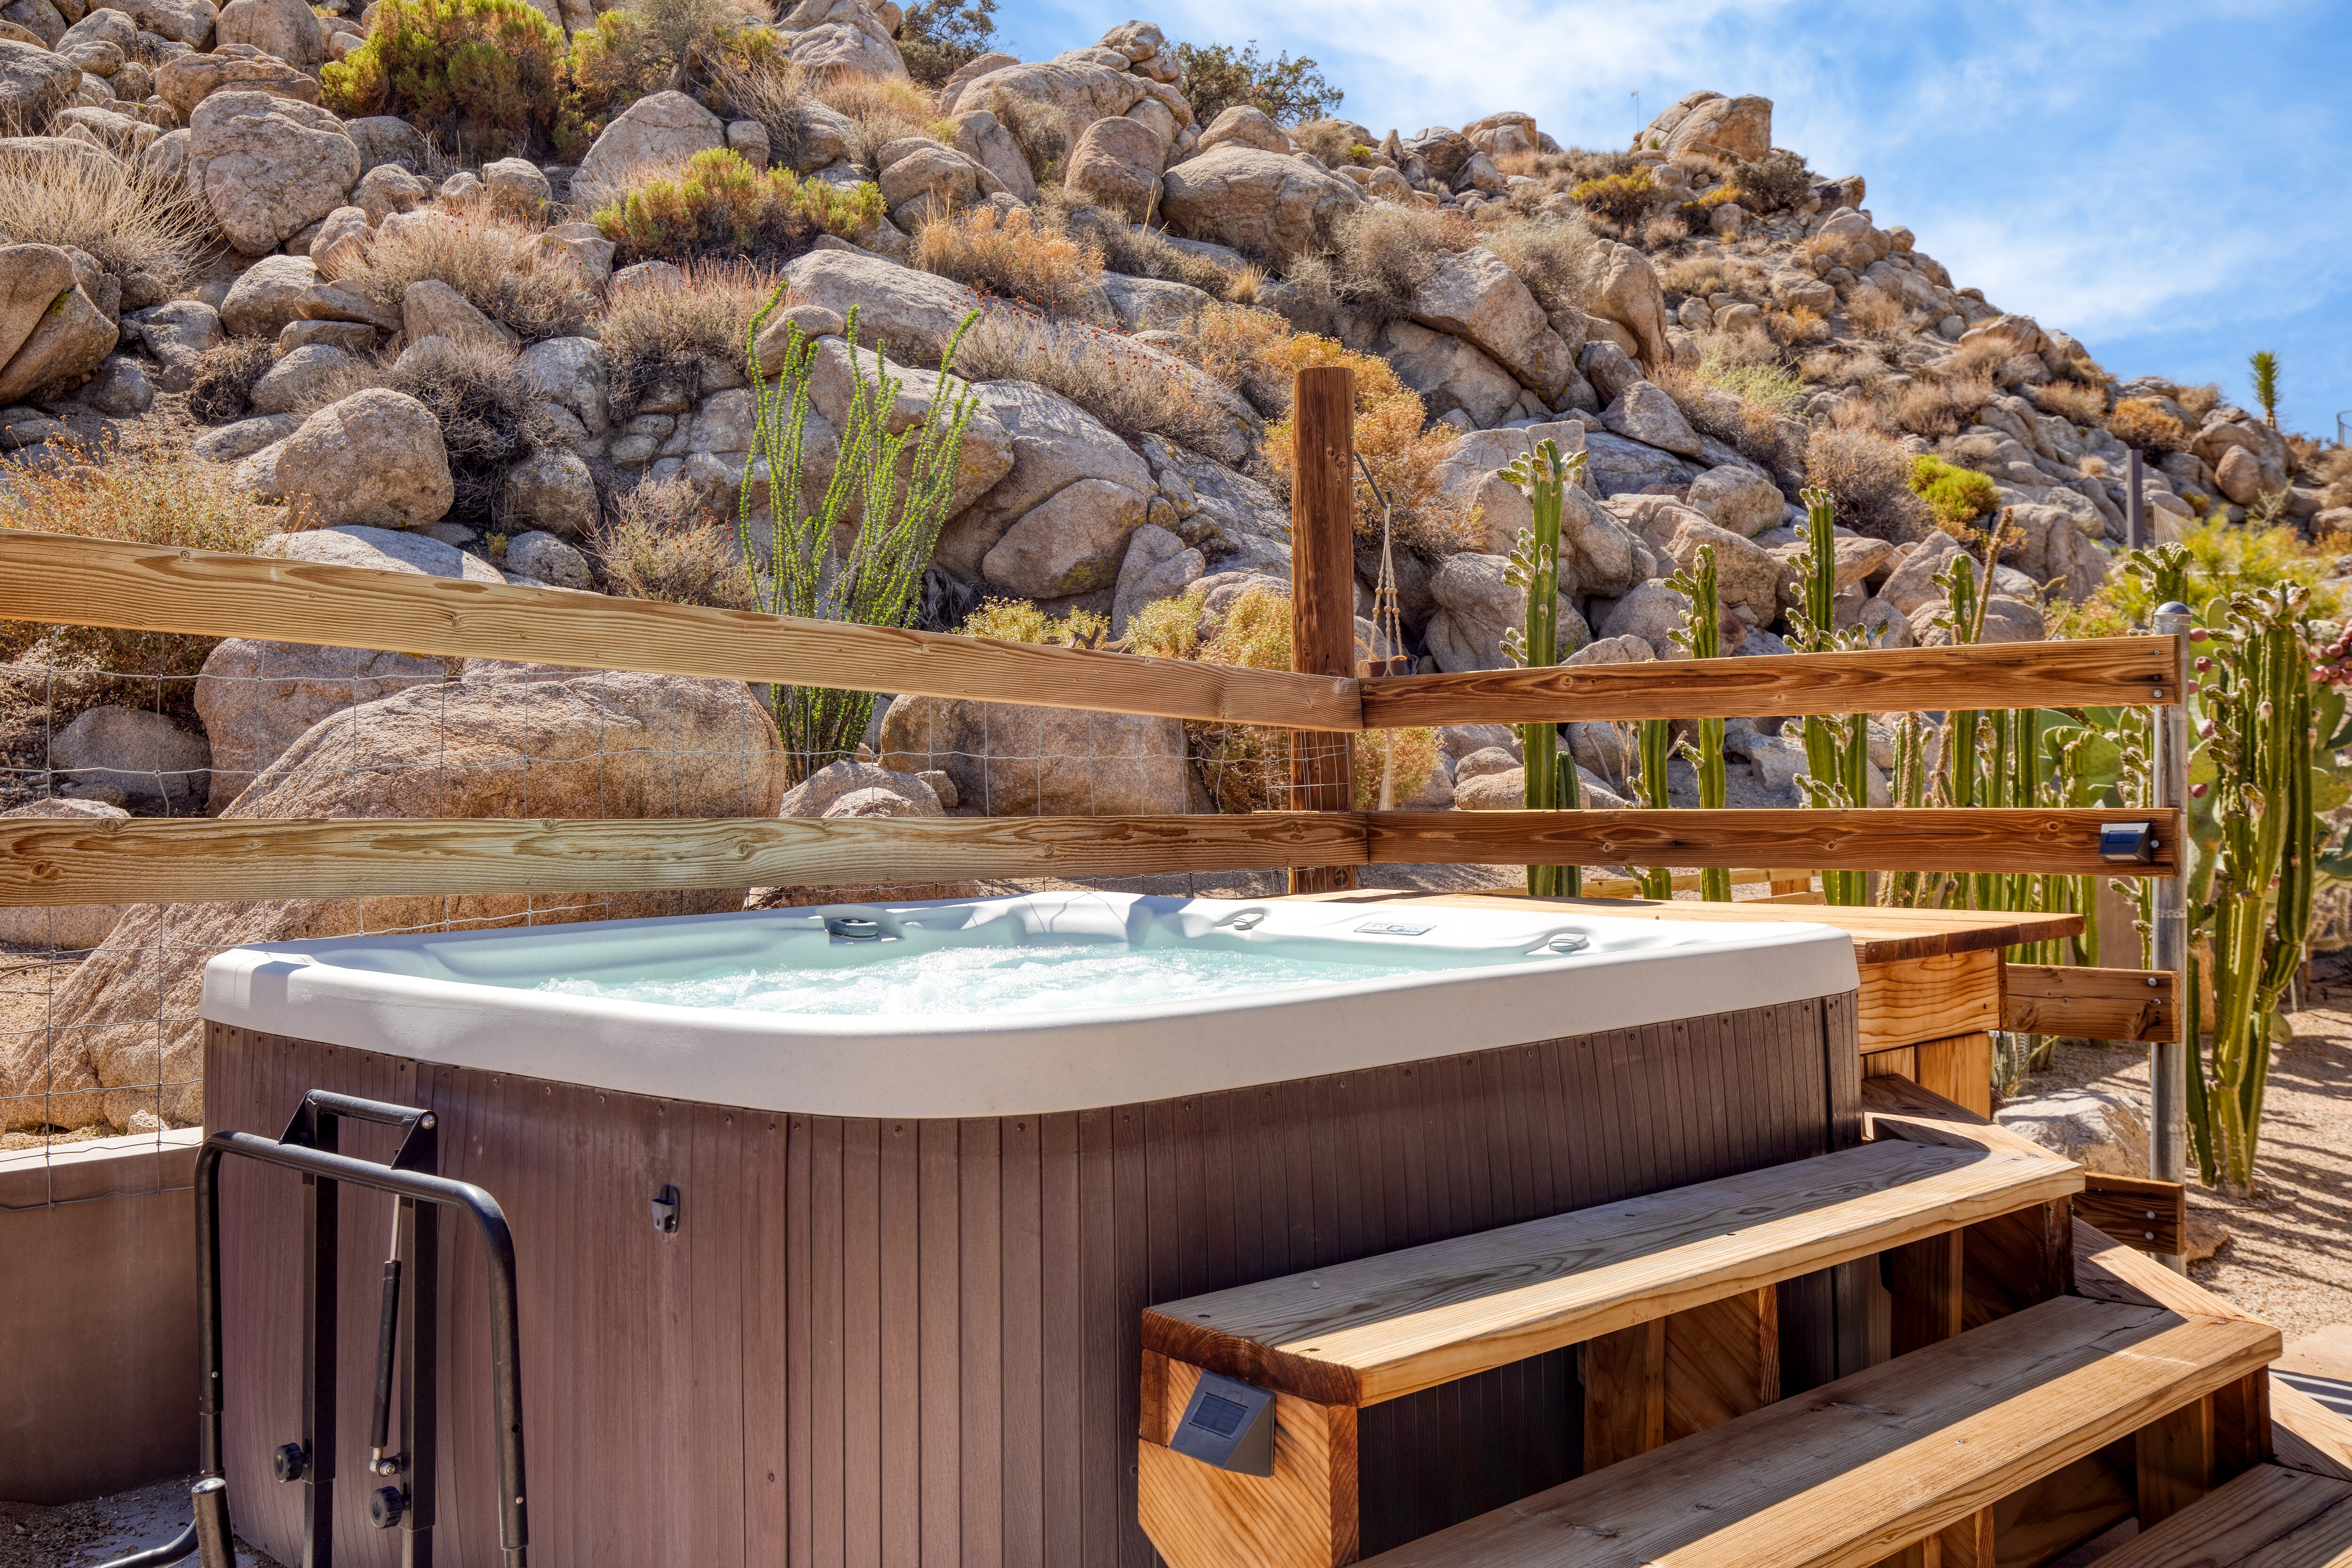 Hot tub at the foot of the hills.